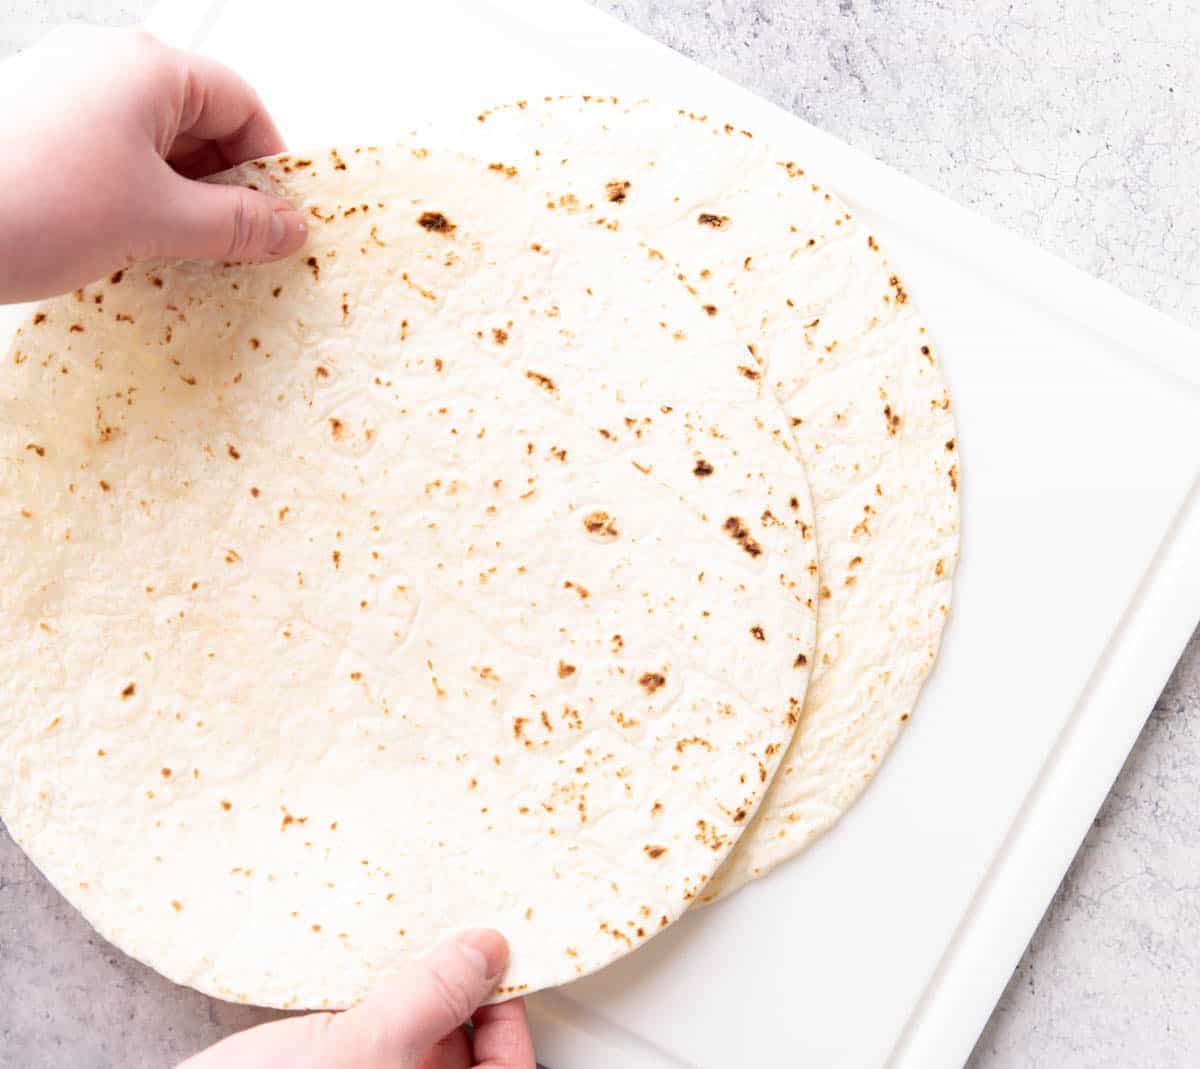 Photo showing How to Make Baked Tortilla Chips – stacking tortillas on a cutting board